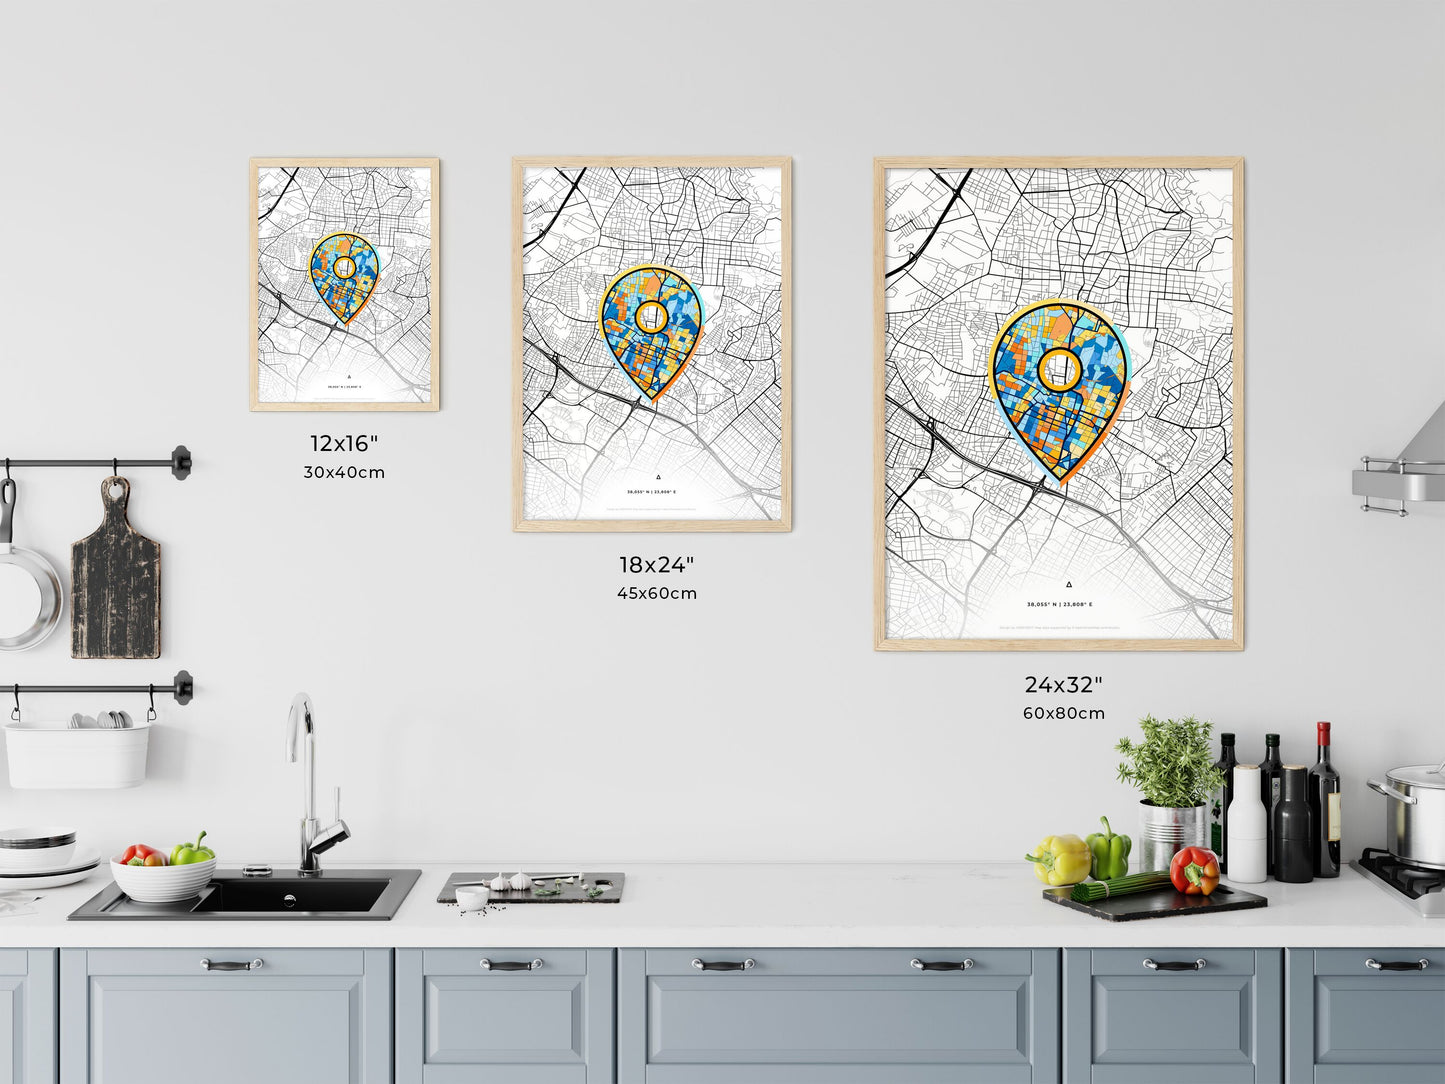 MAROUSI GREECE minimal art map with a colorful icon. Where it all began, Couple map gift.